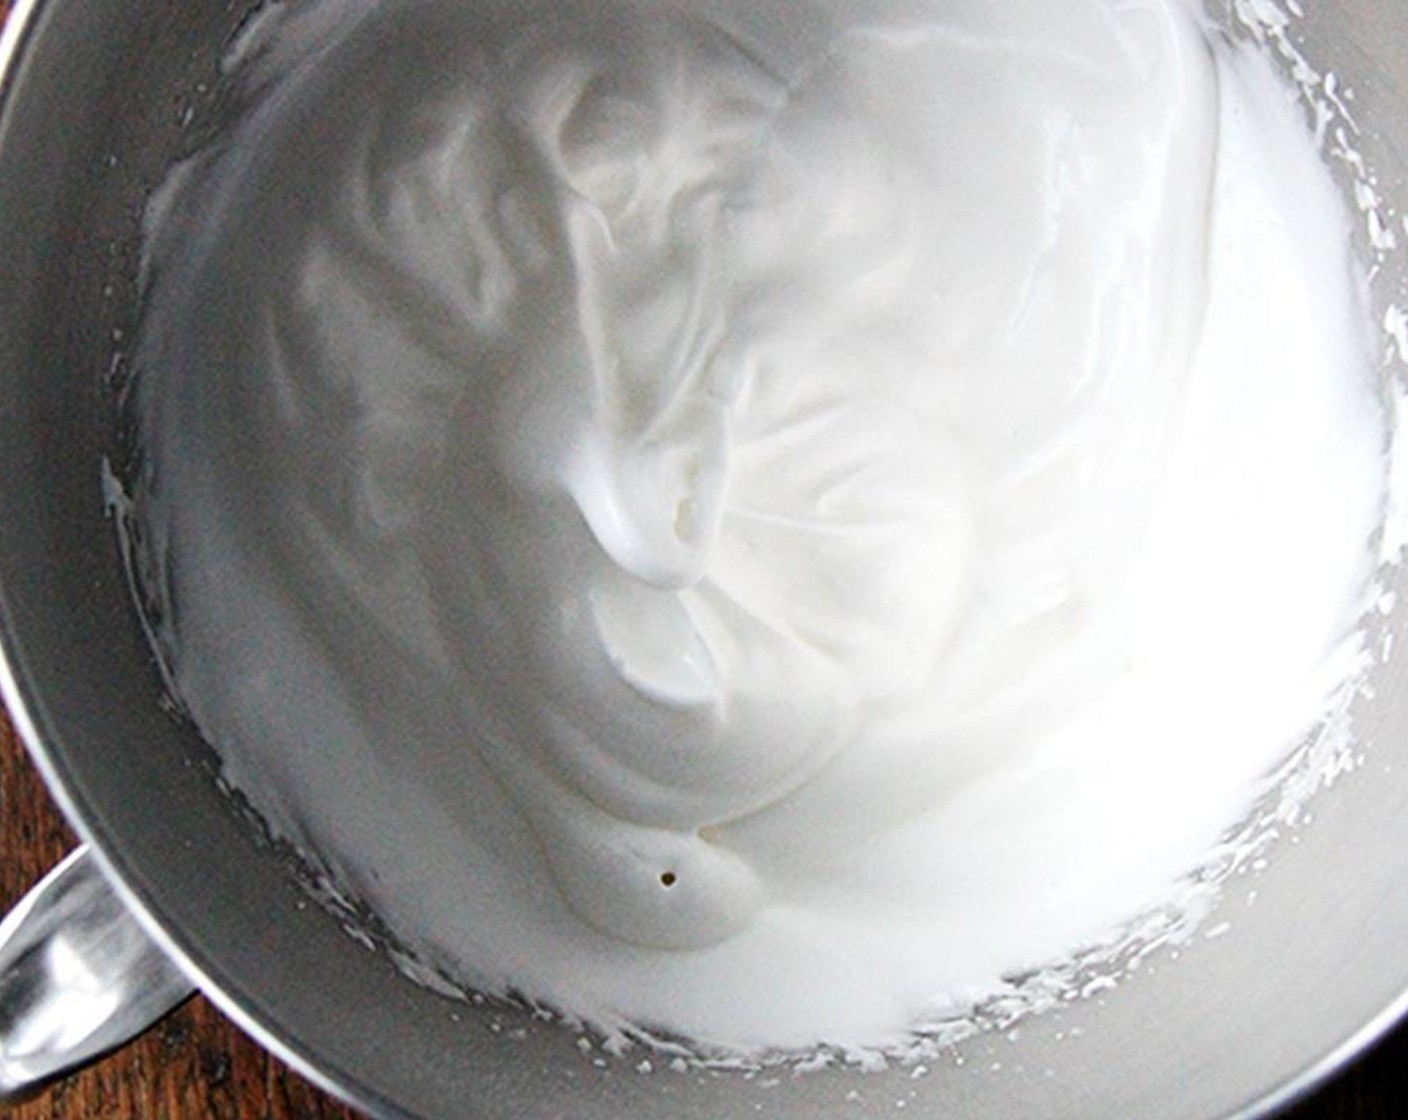 step 6 In a separate bowl, beat the egg whites with Salt (1 pinch) until frothy. Continue to beat until they start to hold their shape. Add 1 tablespoon of sugar and continue to beat until thick and shiny, but not completely stiff. Then add the Vanilla Extract (1 tsp).